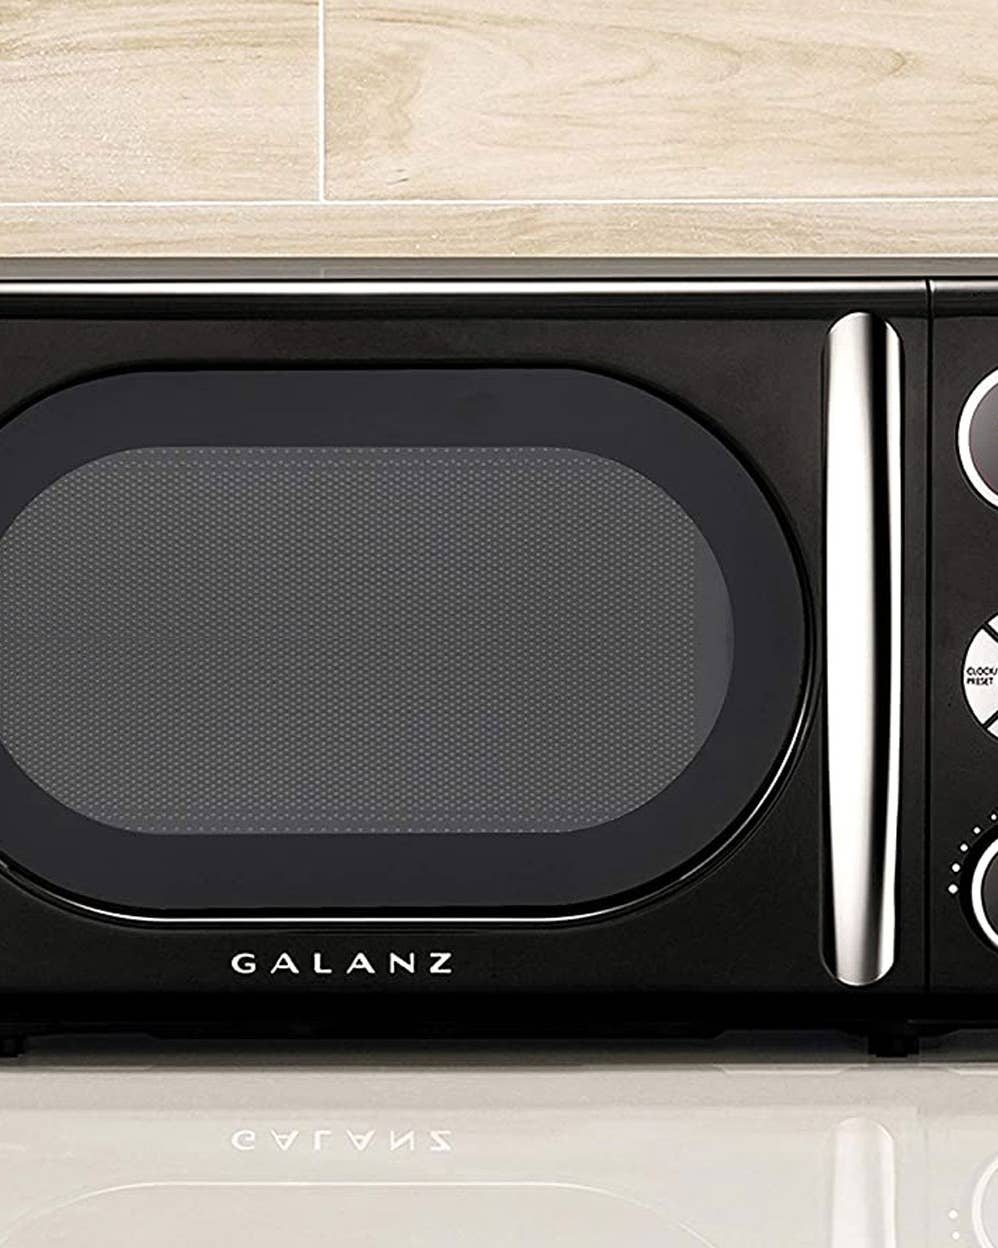 The Best Countertop Microwave to Be Your Sous Chef